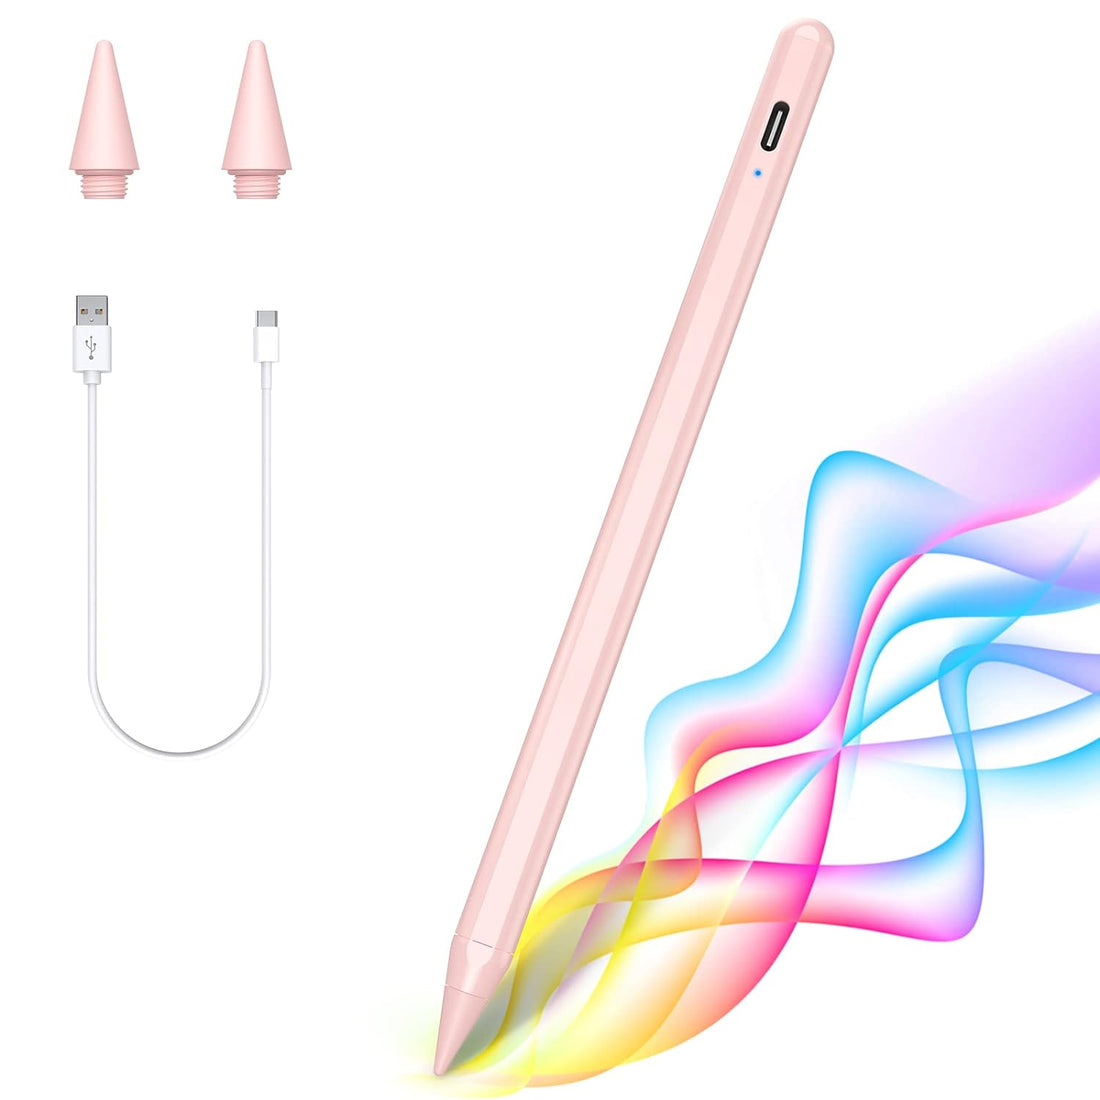 MATEPROX Stylus Pen for iPad, 3rd gen Palm Rejection,Active Stylus Pencil for Apple iPad Pro 11/12.9",iPad 6th/7th Gen,iPad Mini 5th Gen,iPad Air 3rd Gen,Precise for Writing/Drawing/Sketching(Pink)